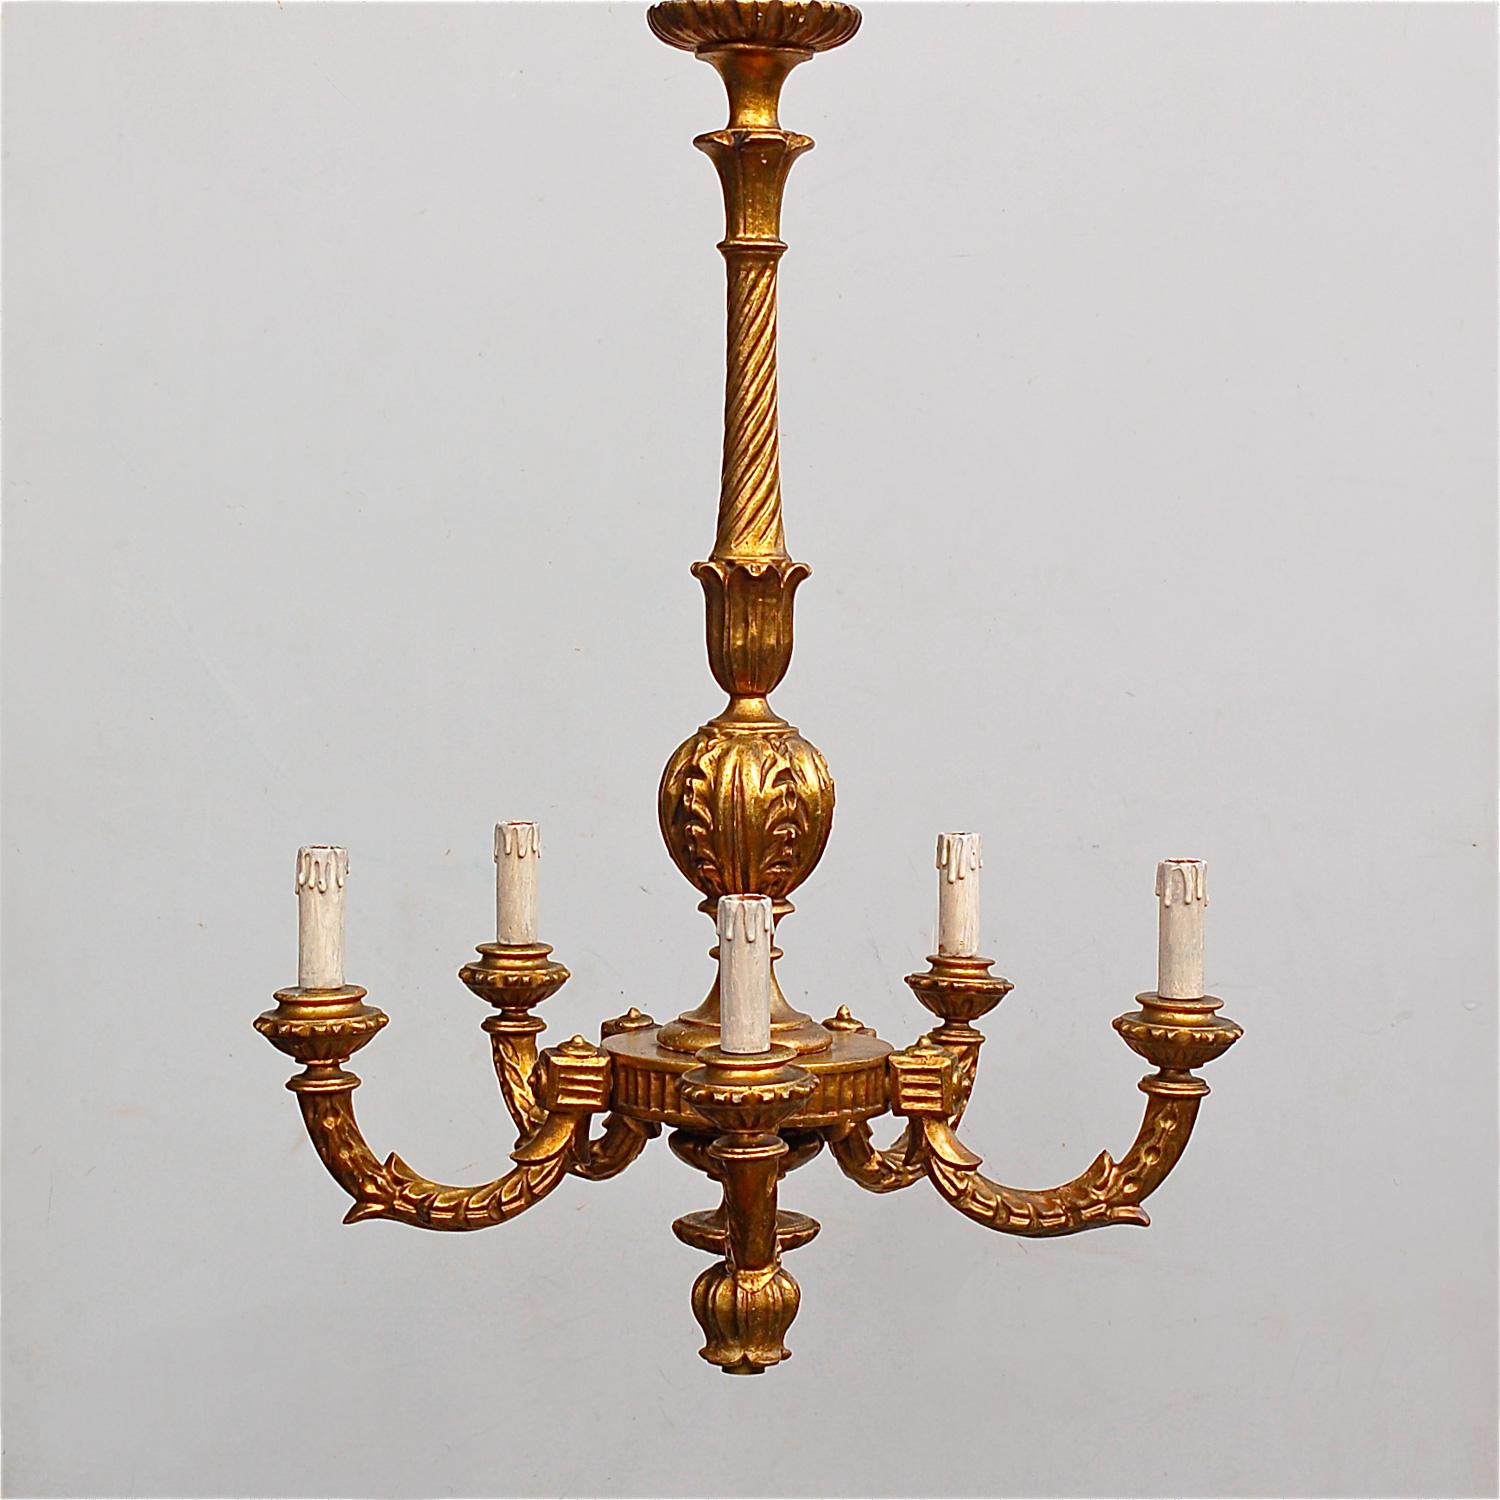 Early 20th century carved wooden chandelier, painted in a warm, antique gold creating an ormolu style effect. It has a slender central column with rounded gallery at the based ending in a carved wooden flower shaped bulb holder. Five curved wooden